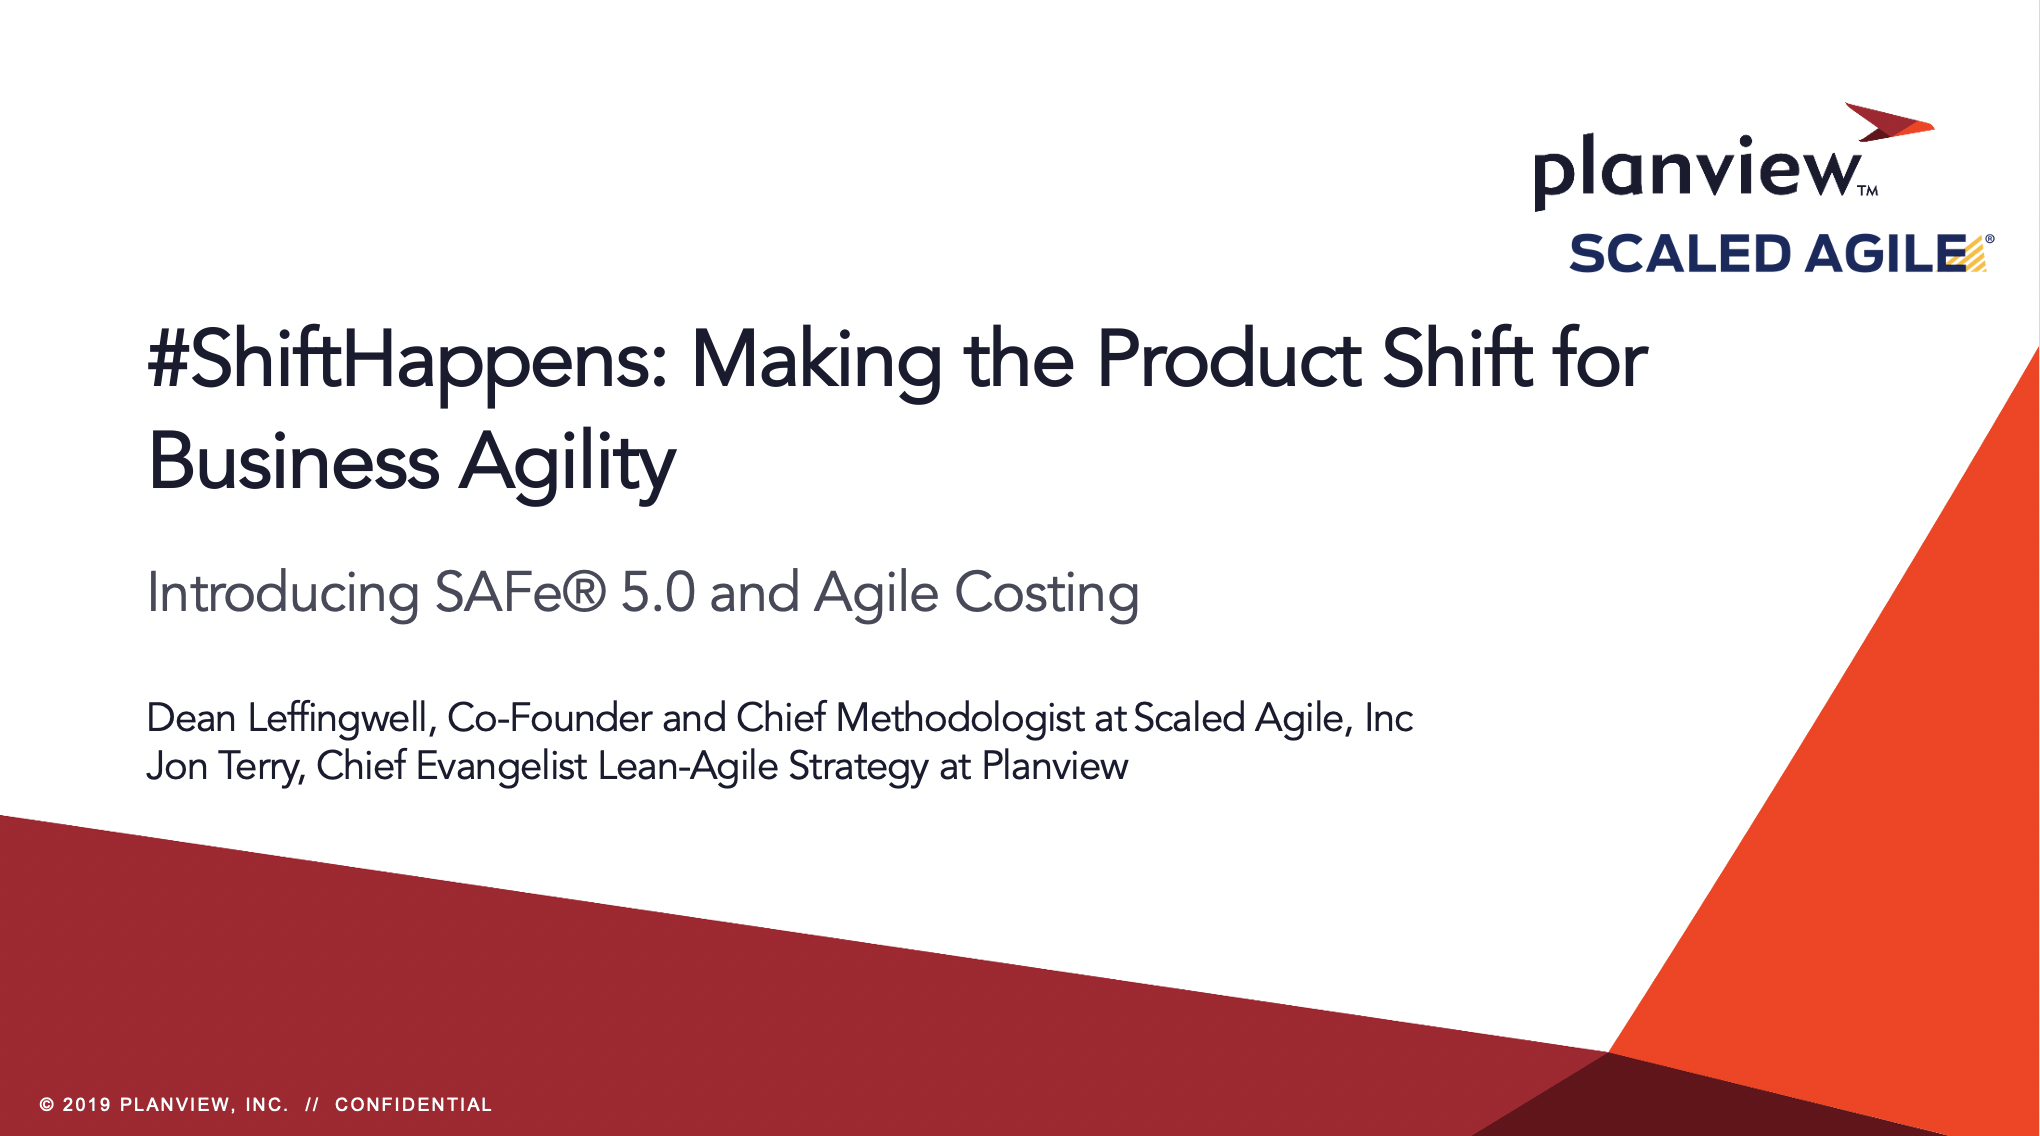 #ShiftHappens: Making the Product Shift for Business Agility